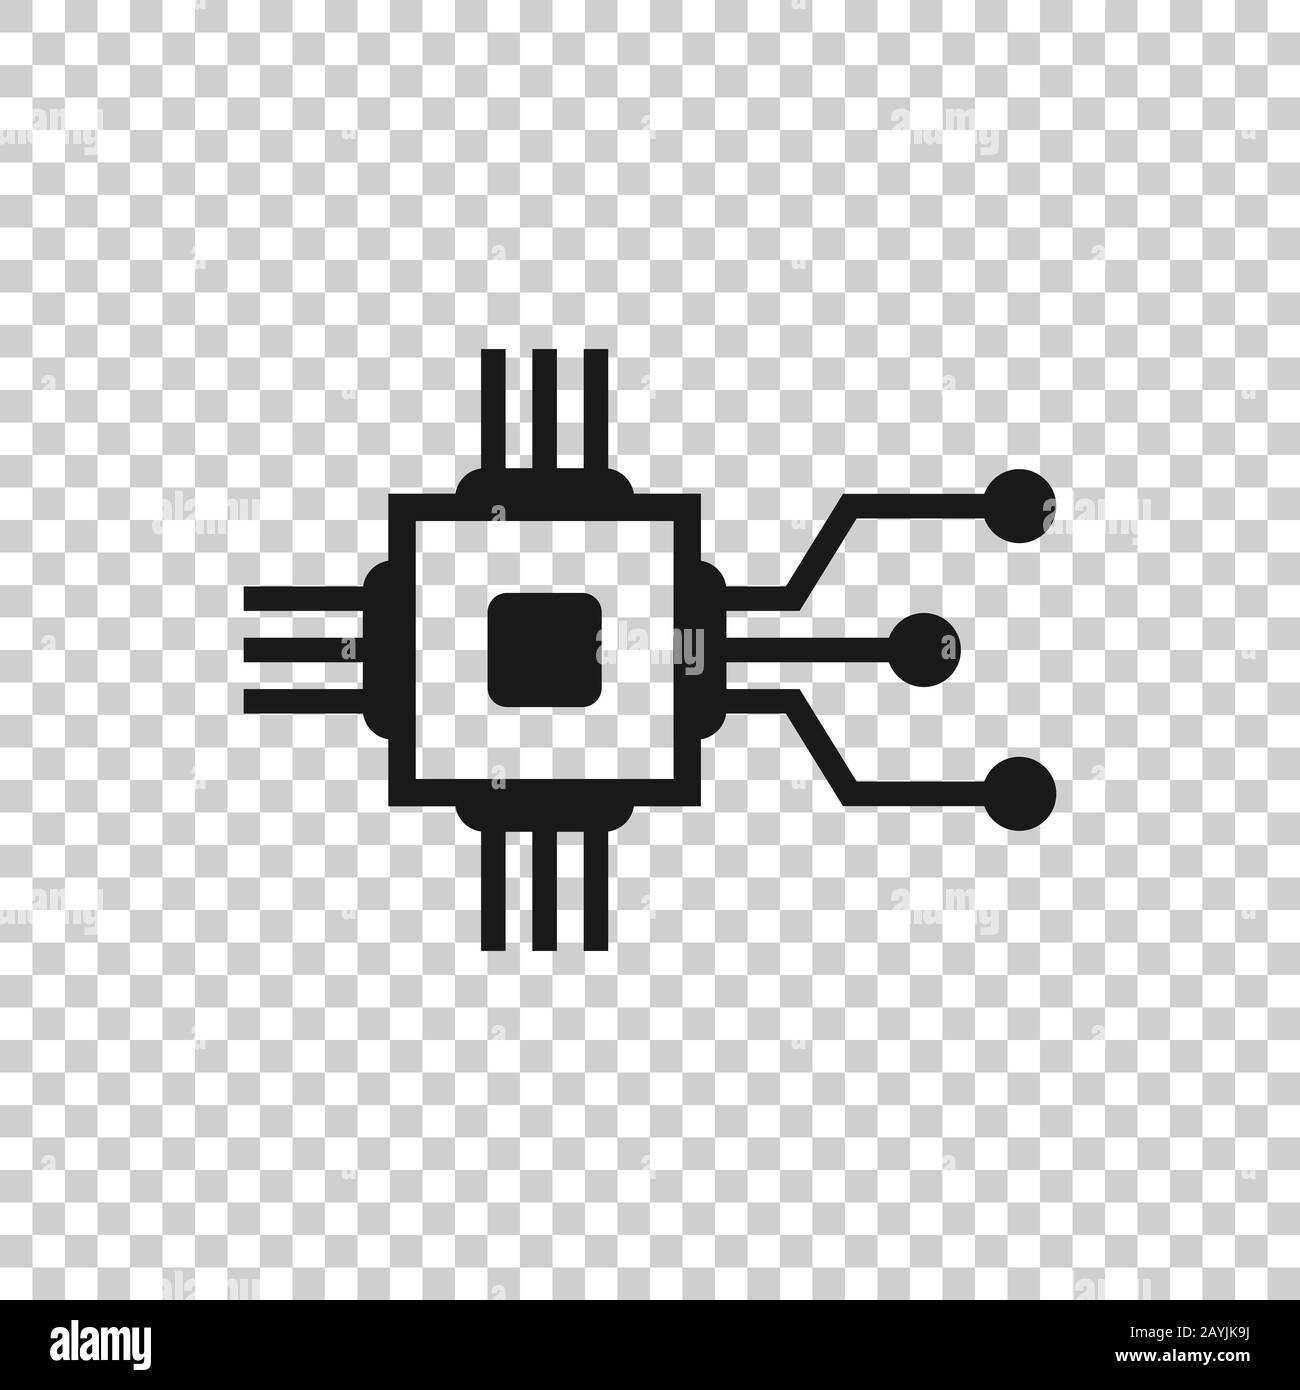 Computer chip icon in flat style. Circuit board vector illustration on white isolated background. Cpu processor business concept. Stock Vector